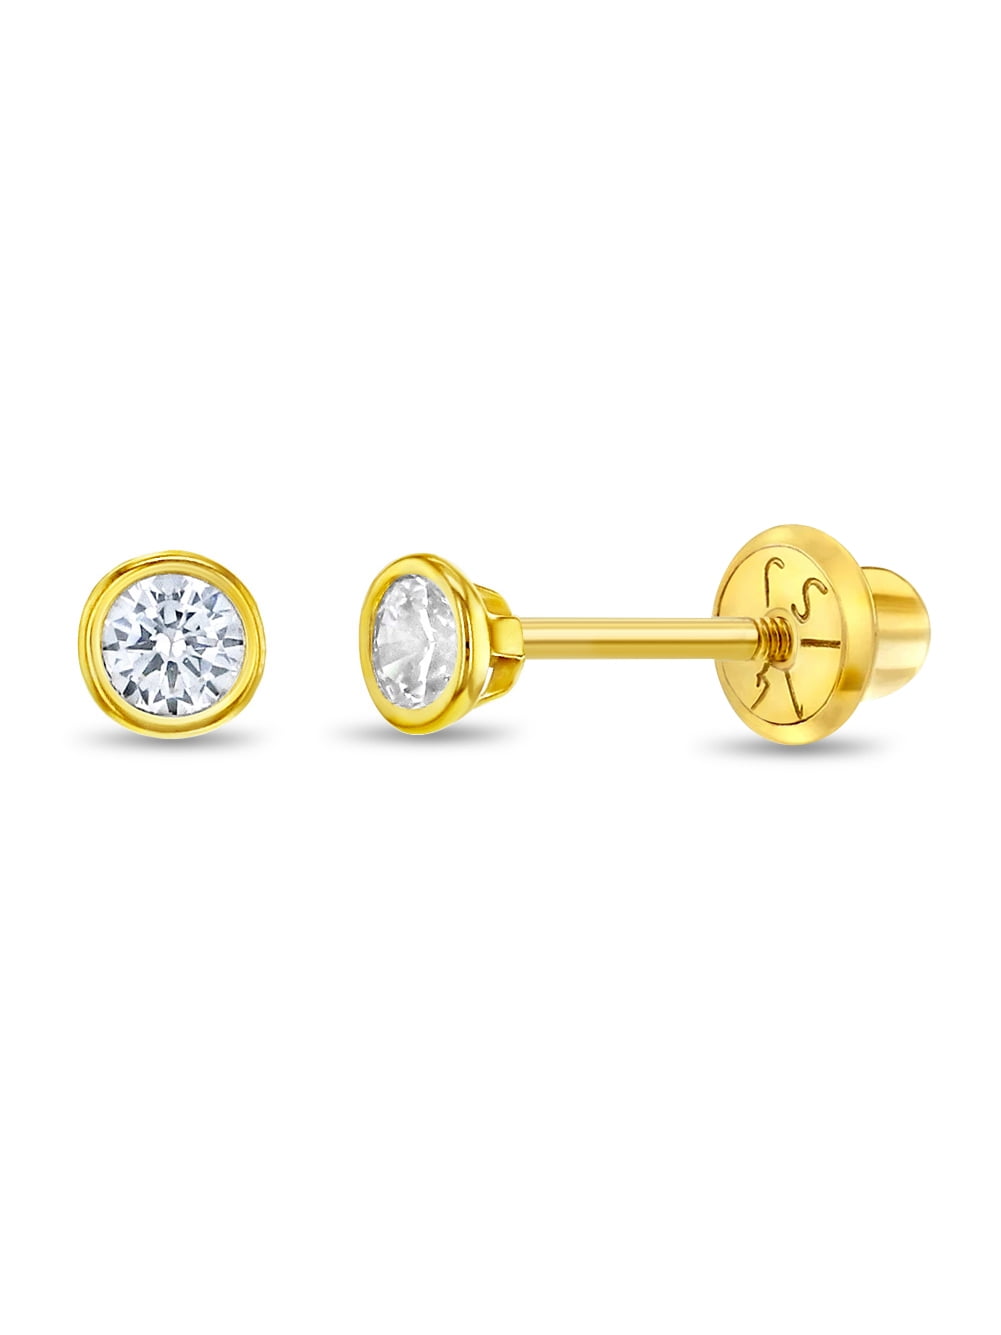 Gold Plated Round Clear CZ Screw Back Earrings for Toddlers & Little Girls  5mm 